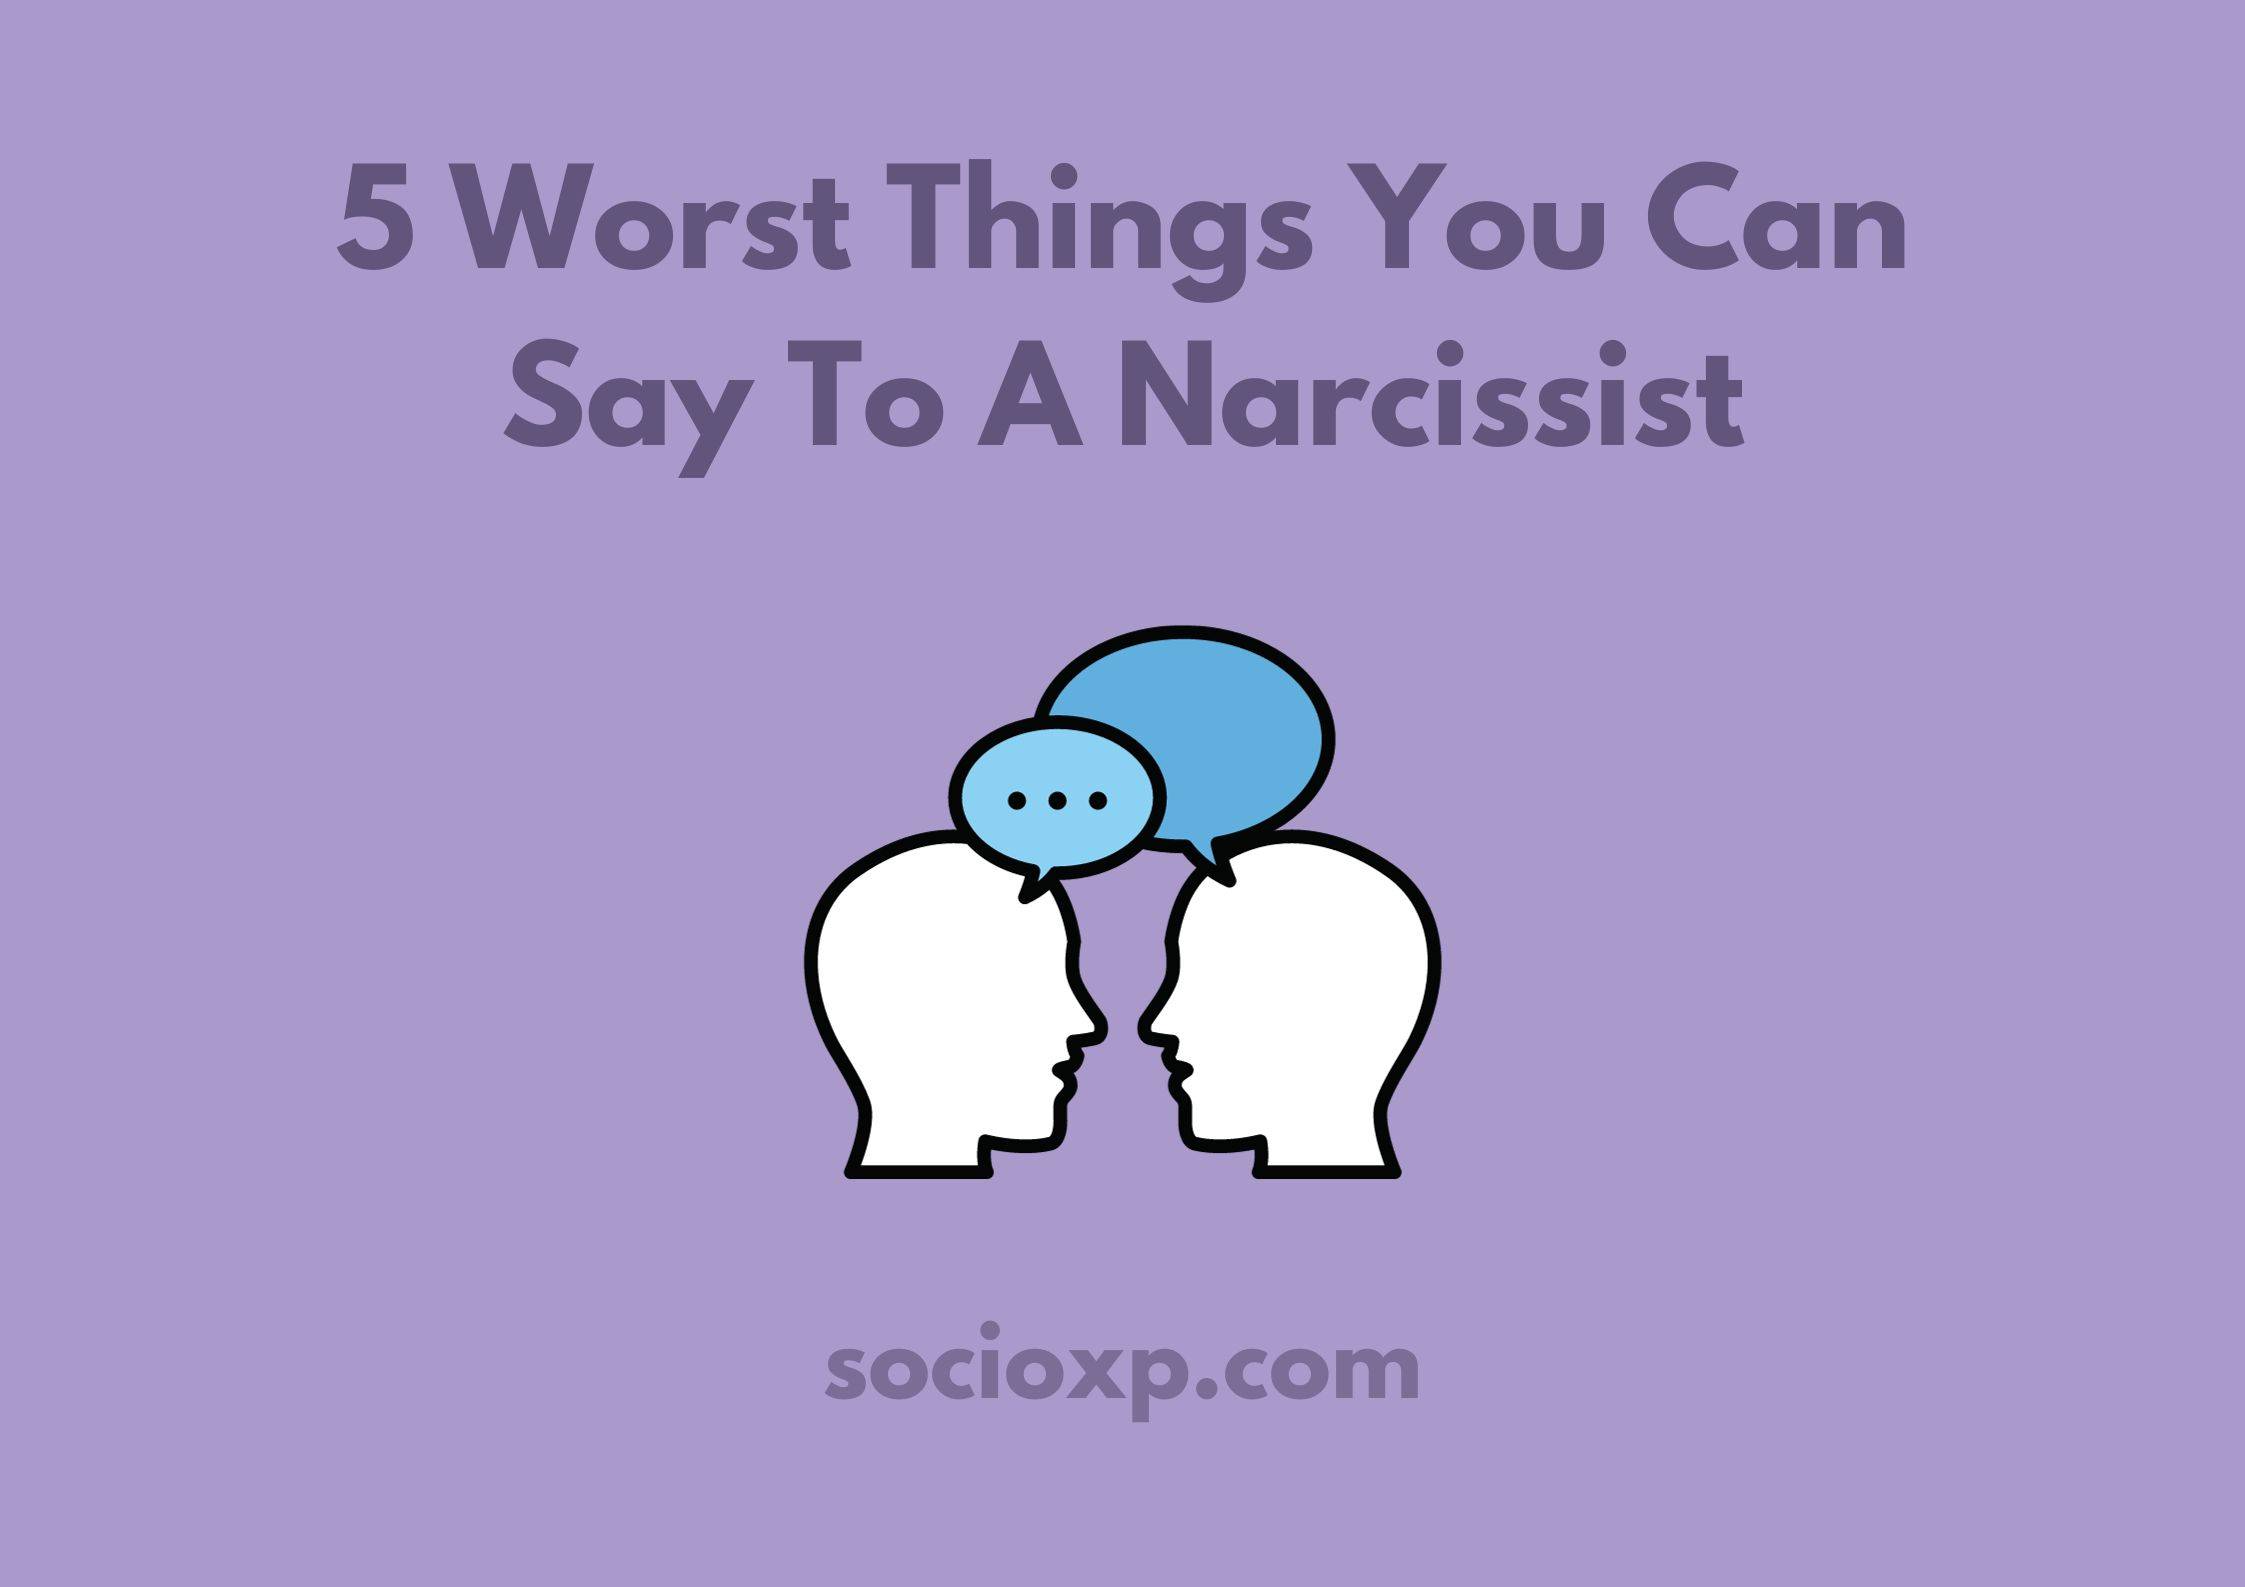 5 Worst Things You Can Say To A Narcissist